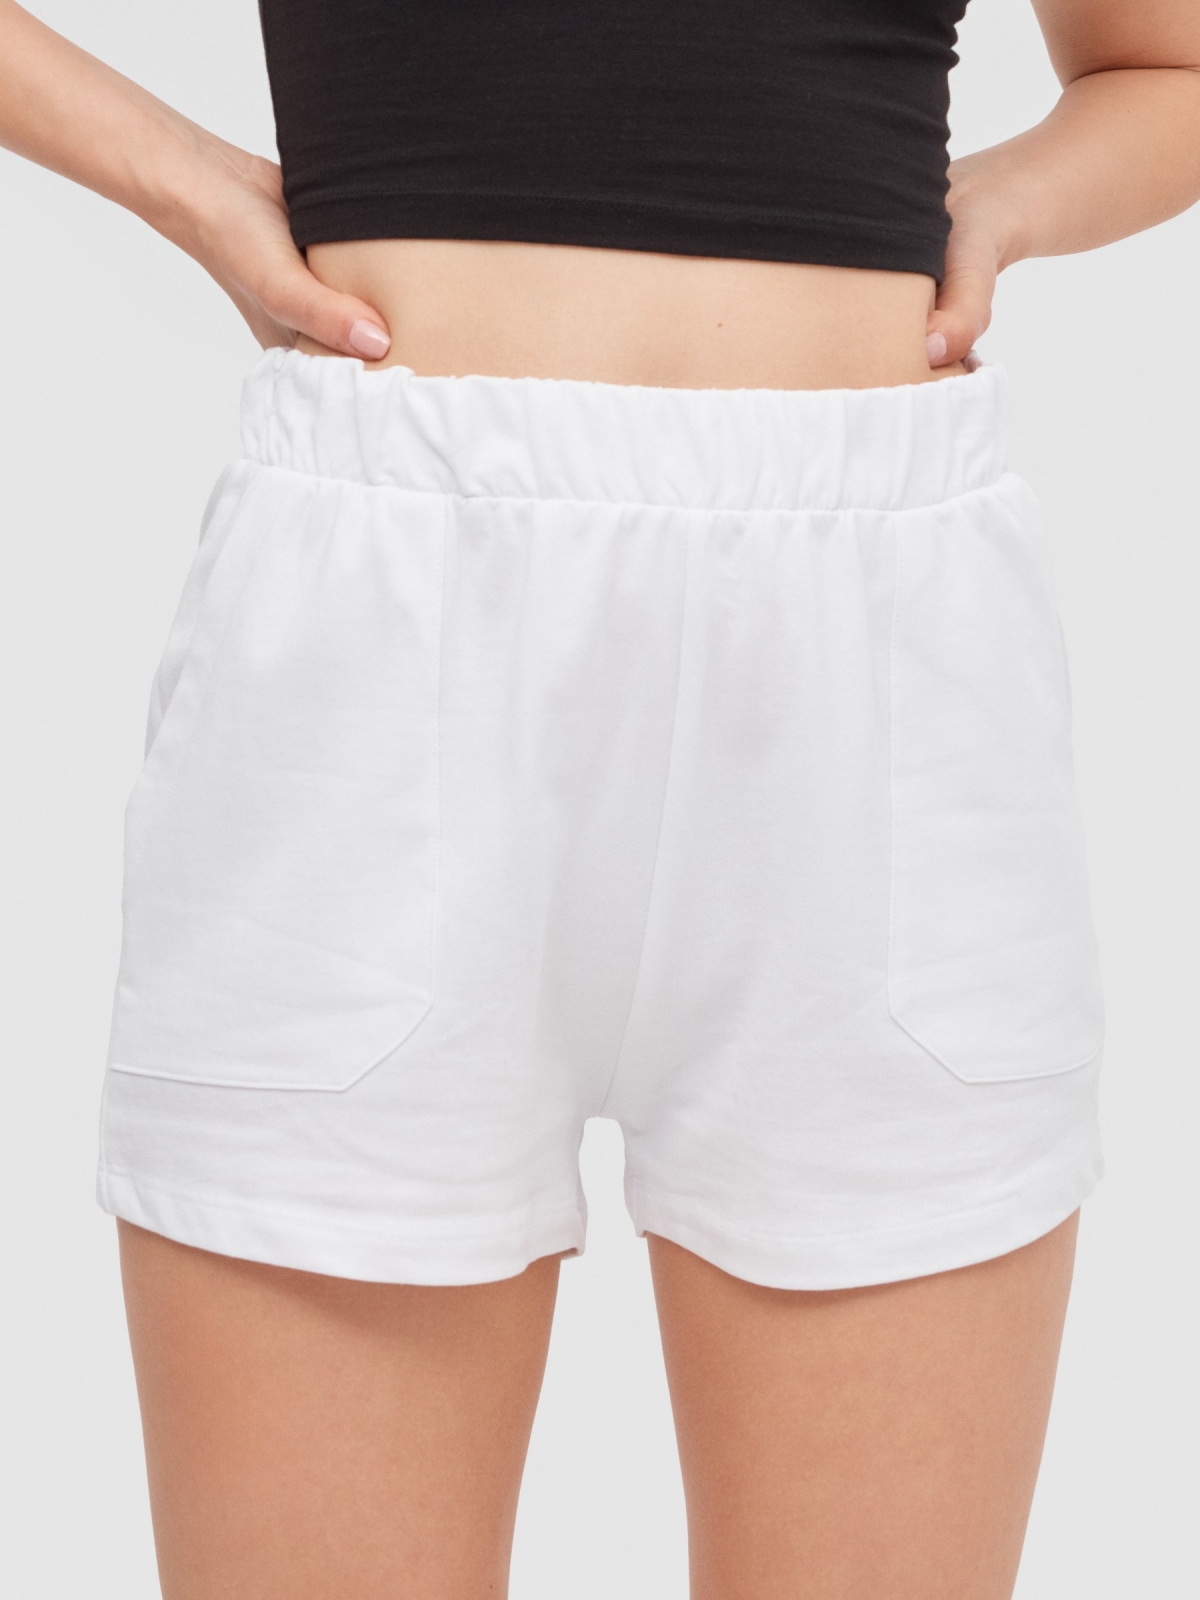 Elastic waist shorts with pockets white detail view